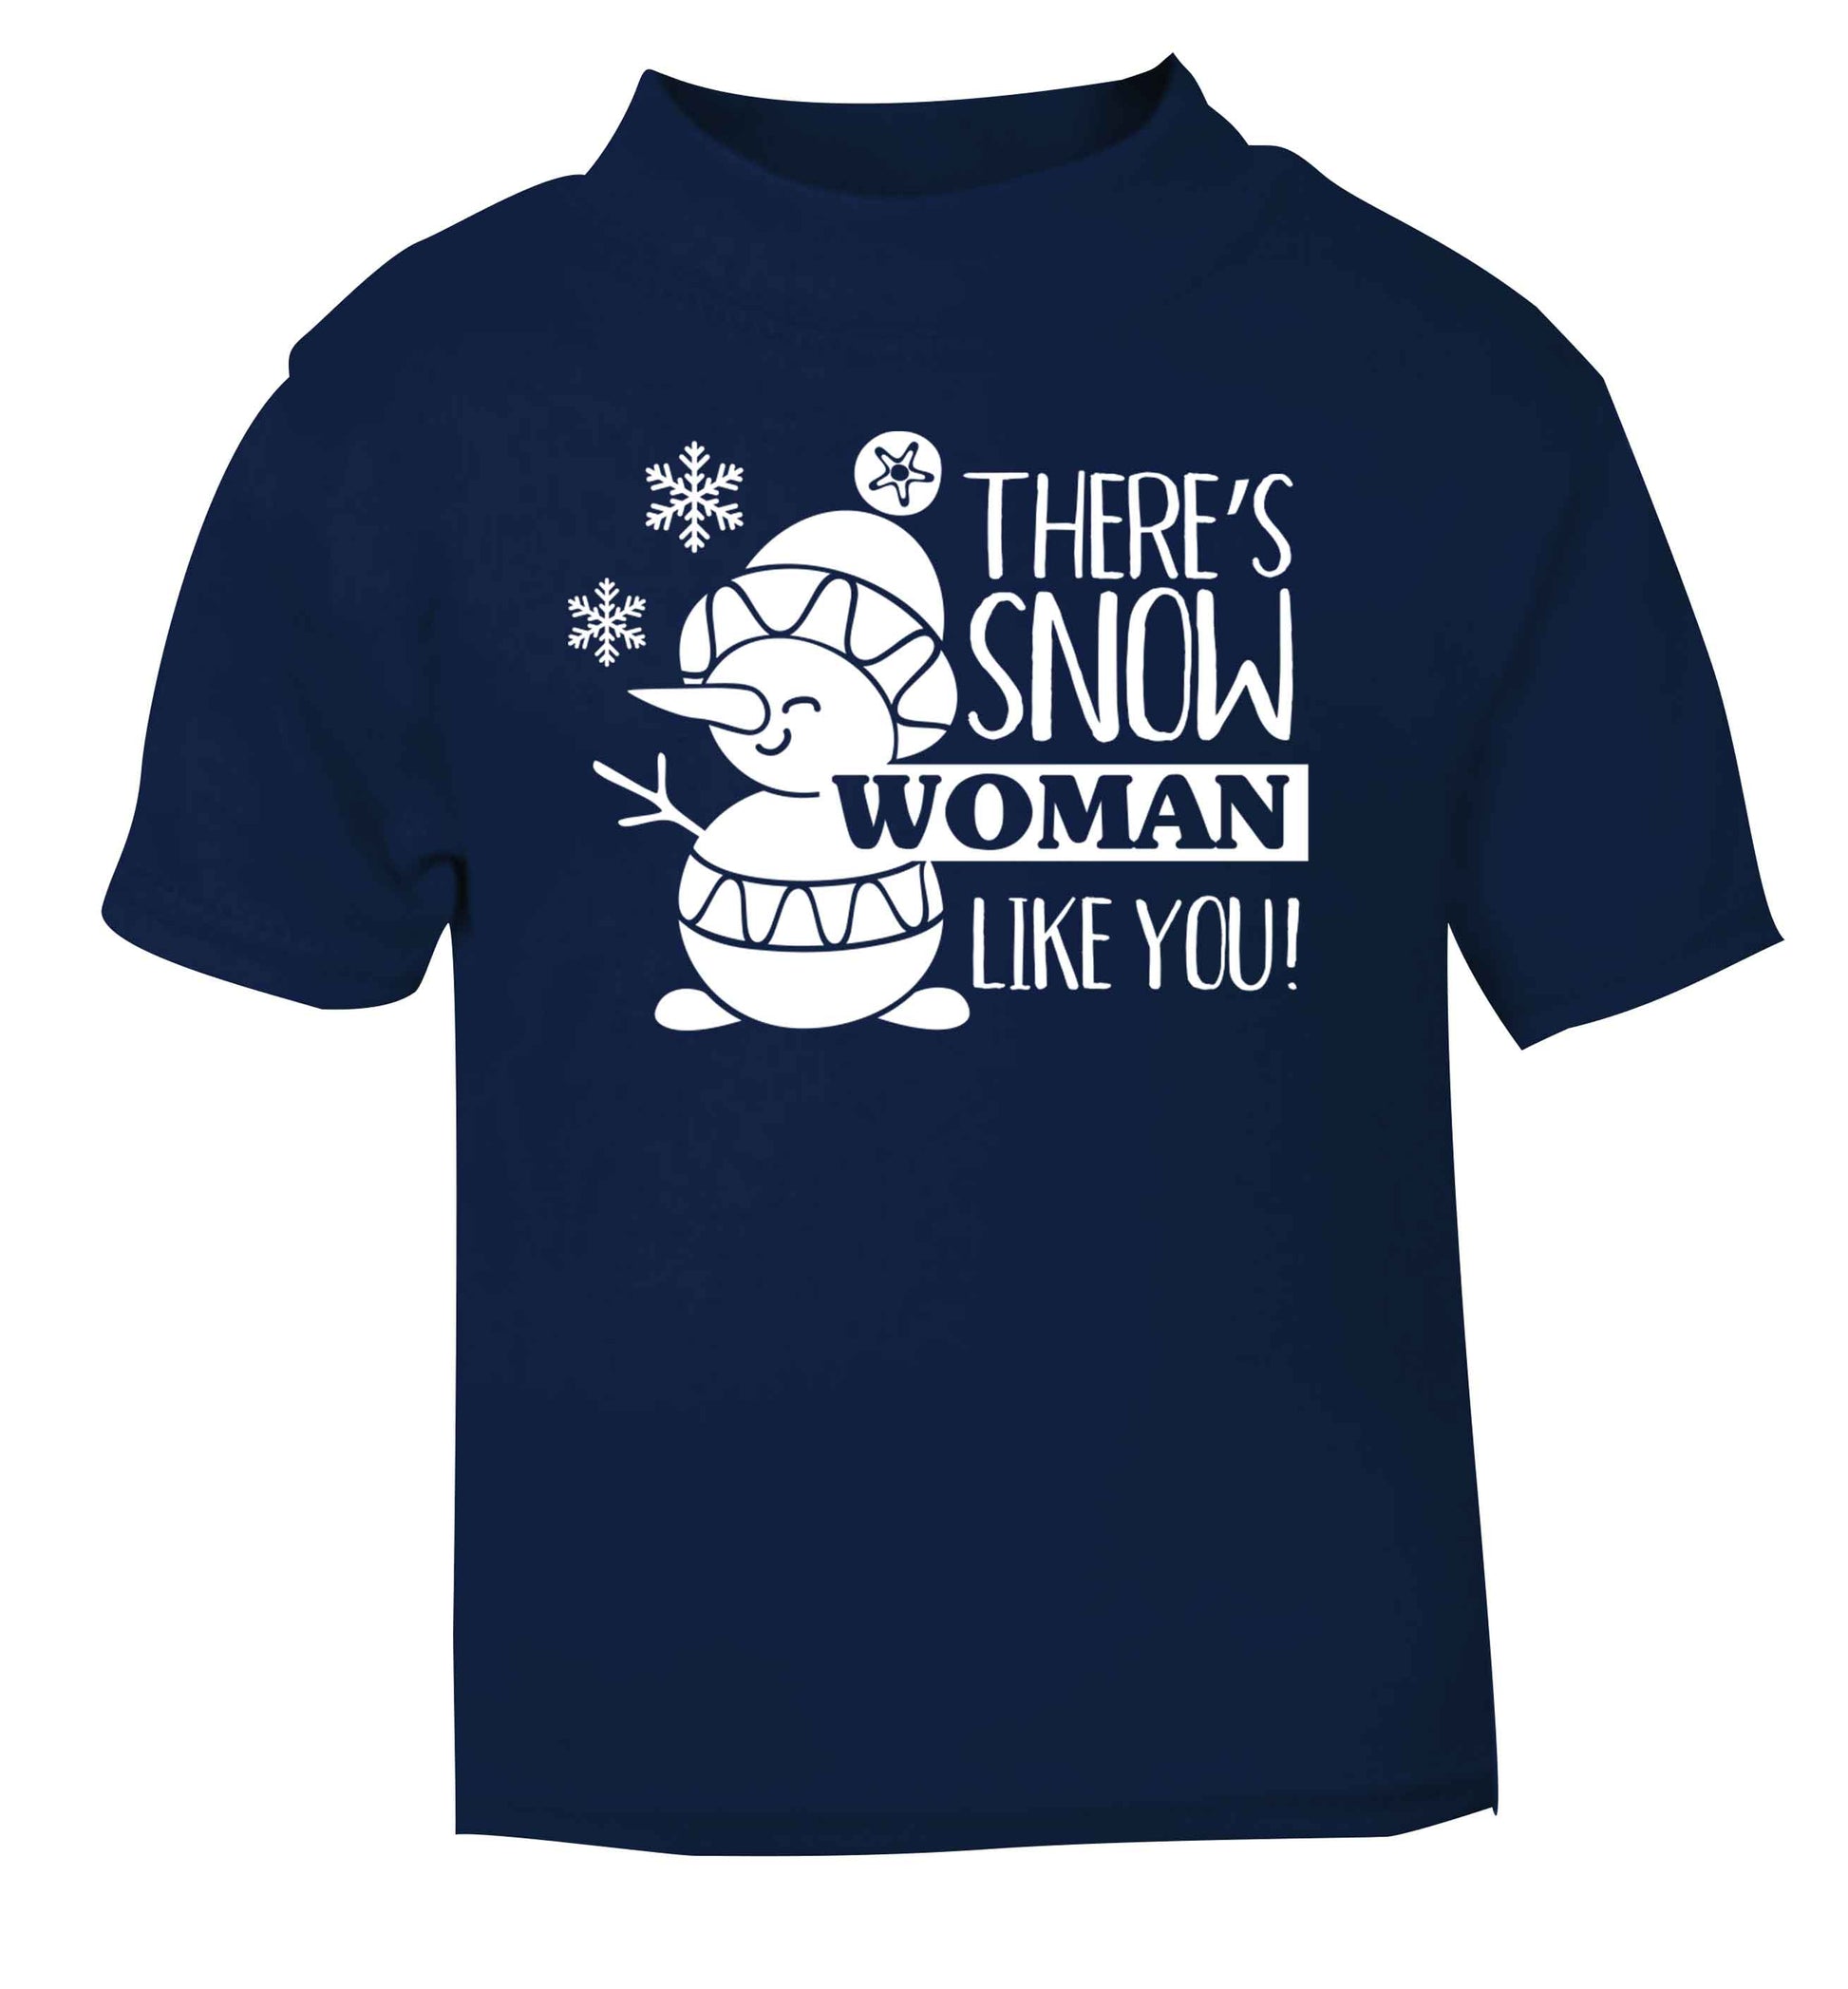 There's snow woman like you navy baby toddler Tshirt 2 Years